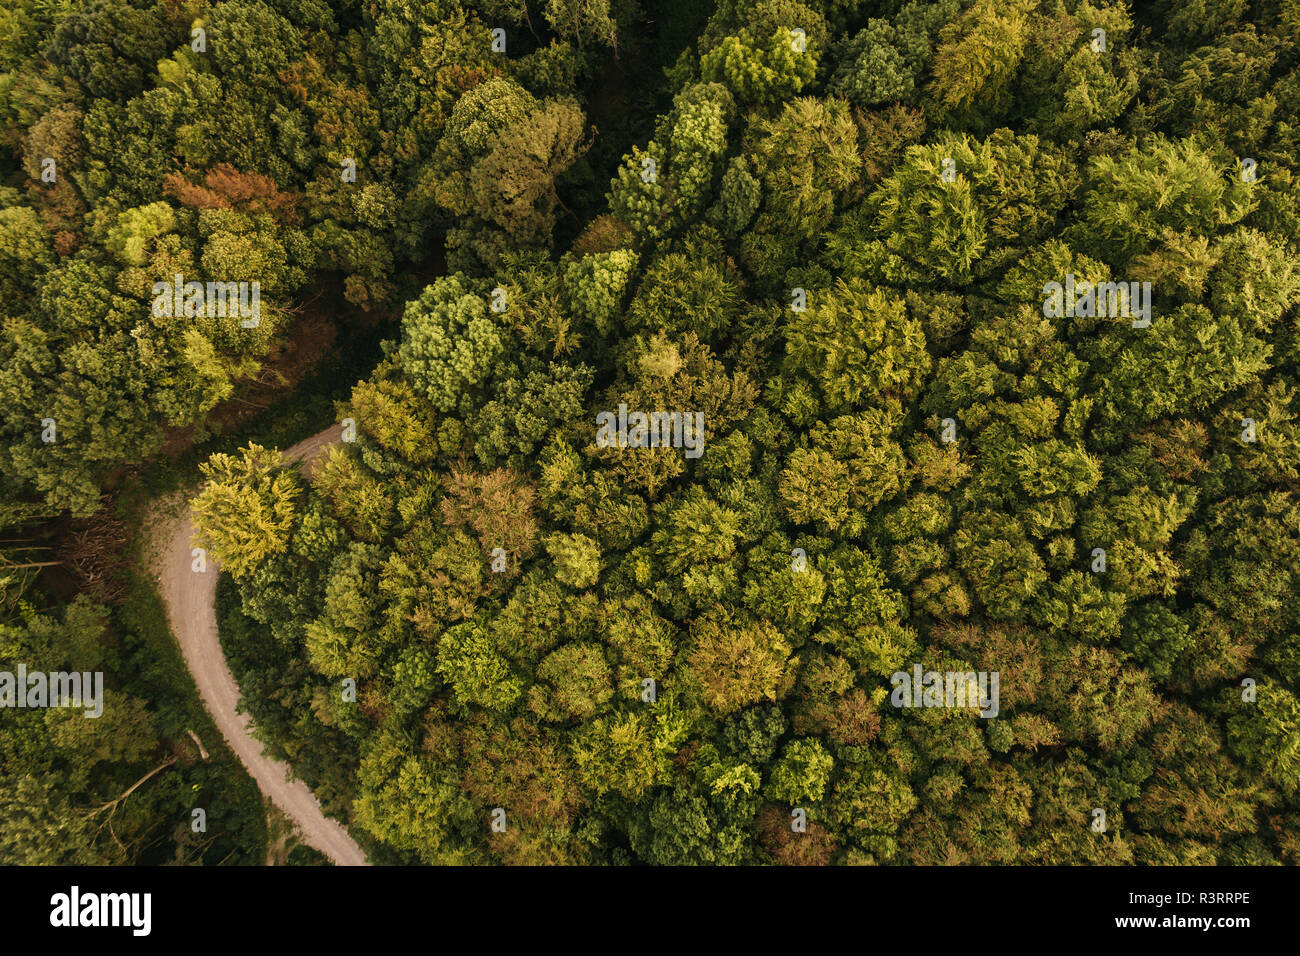 Austria, Lower Austria, Vienna Woods, Biosphere Reserve Vienna Woods, Aerial view of dirt road and forest in the early morning Stock Photo